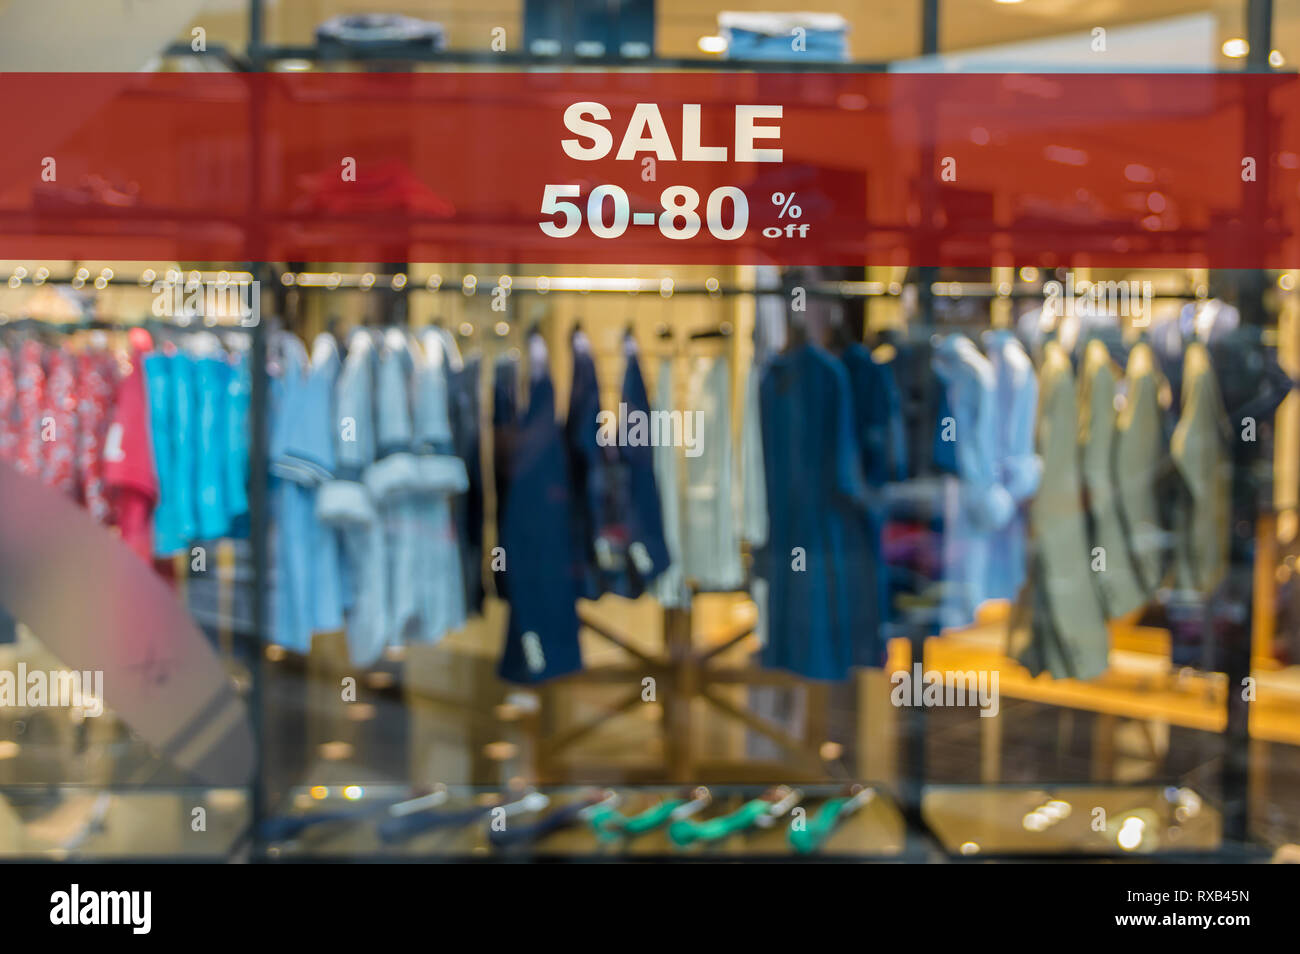 Sale 50-80% off mock up advertise display frame setting over the Abstract blurred photo of clothing store in a shopping mall, shopping concept Stock Photo